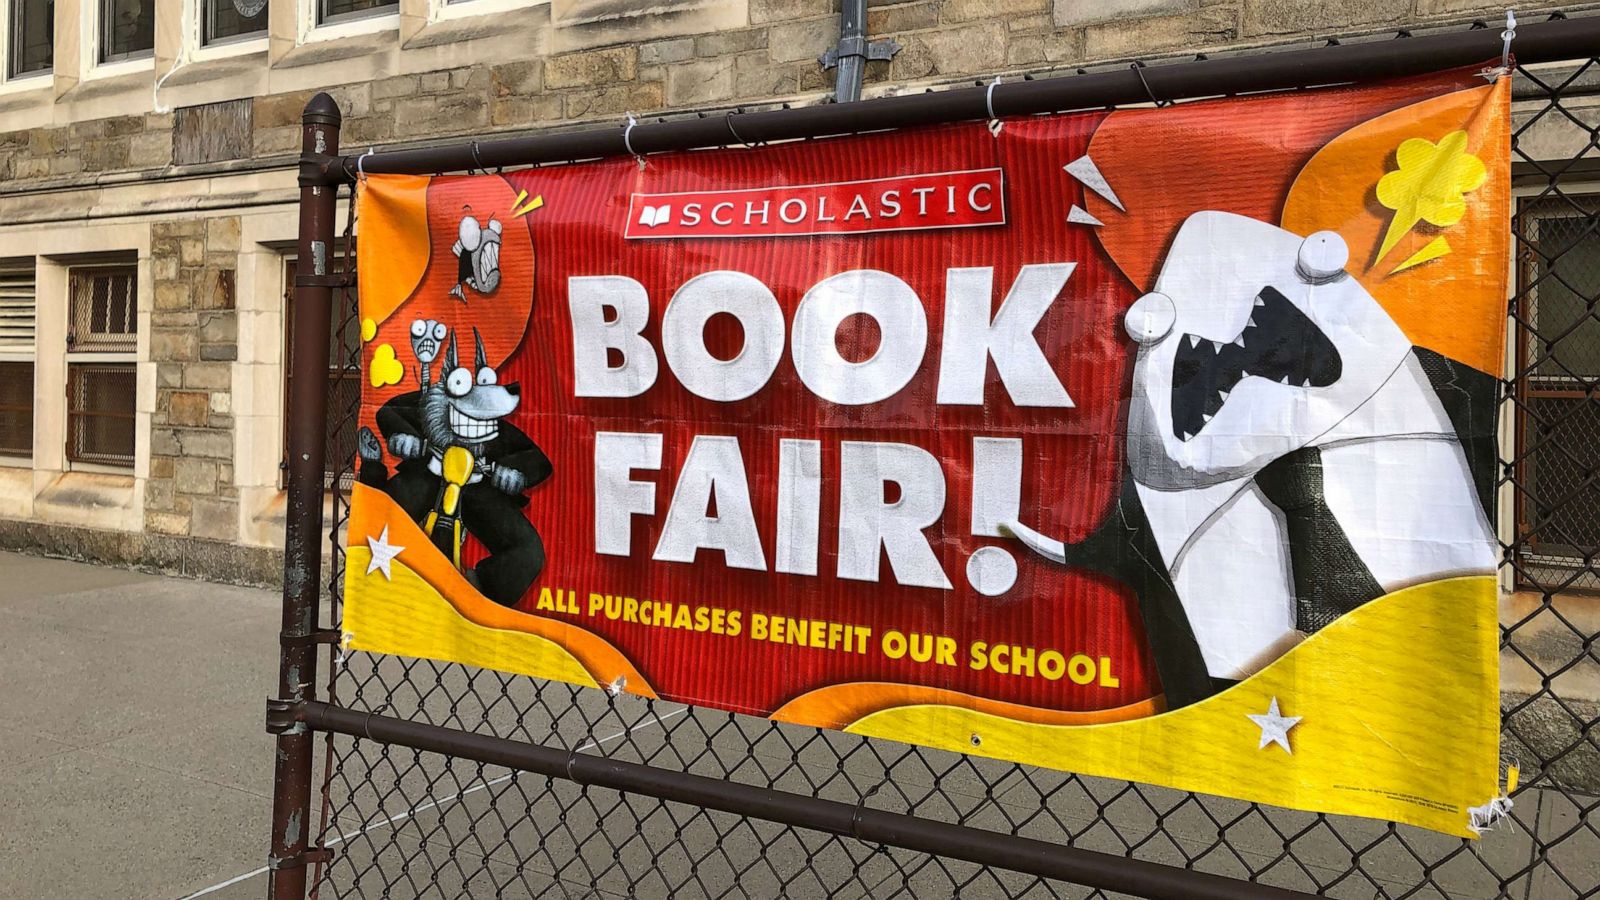 Scholastic makes certain books about race and LGBTQ issues optional for its  elementary school book fairs